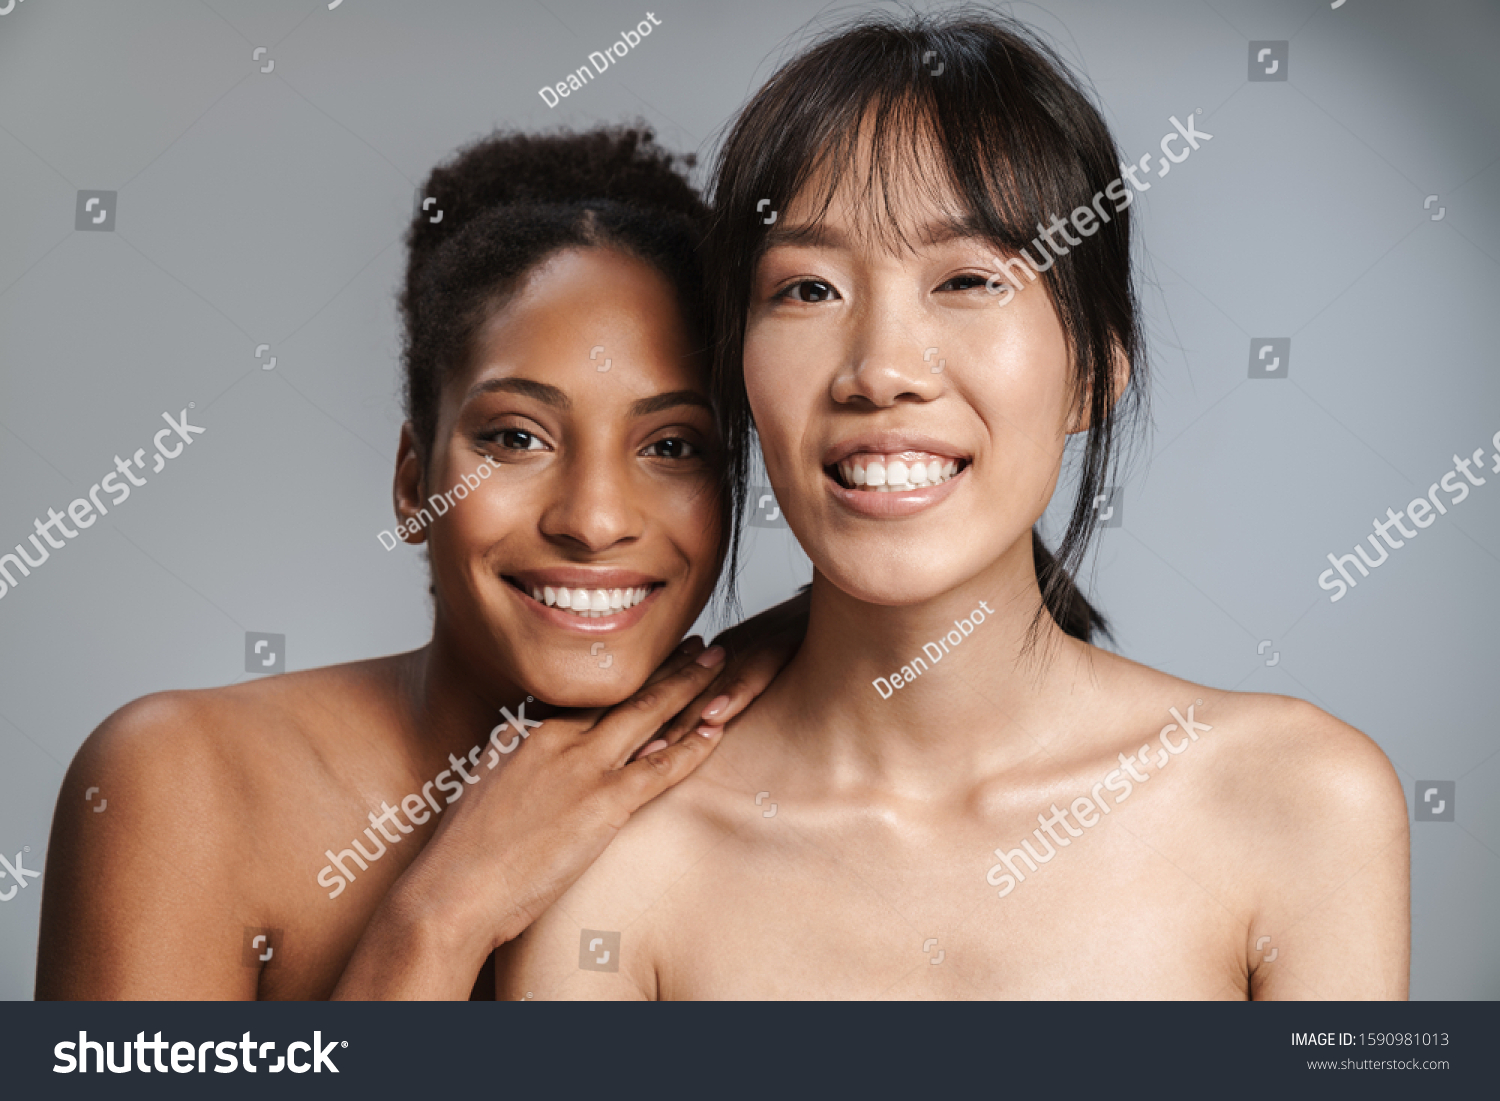 Portrait of two multinational half-naked women smiling and looking at camera isolated over grey background #1590981013